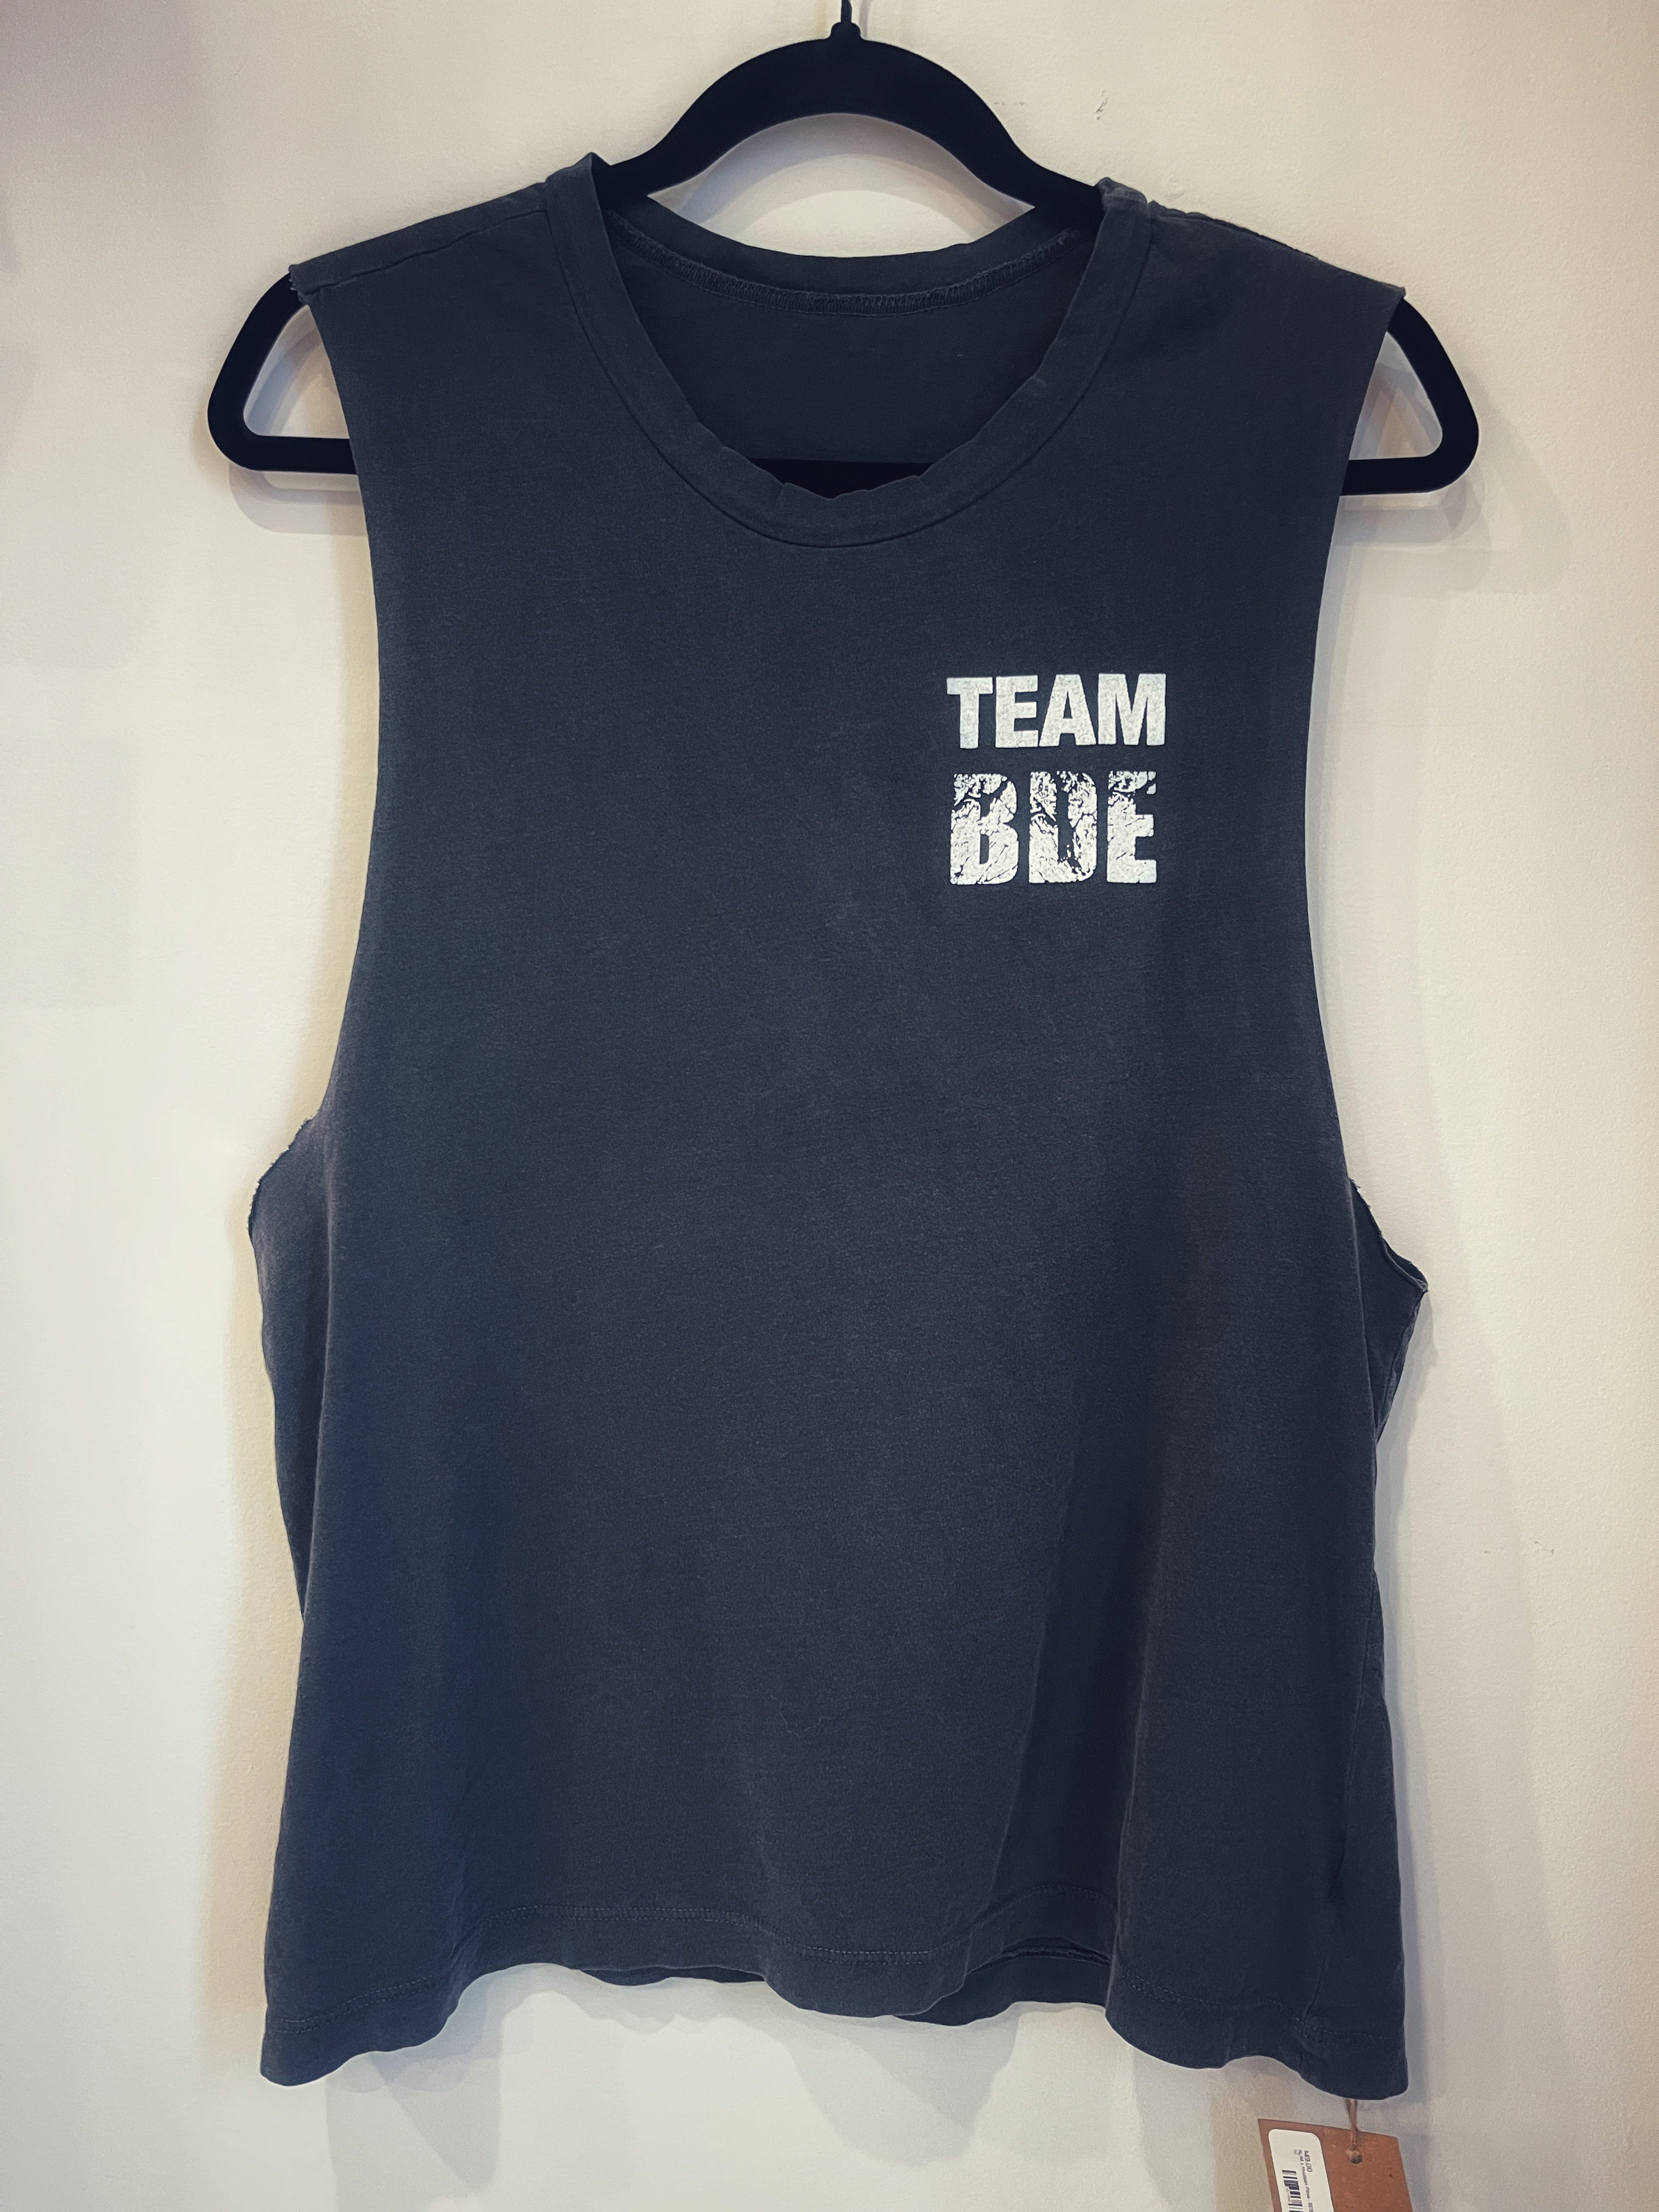 A black tank top with the phrase "Team BDE" in white over the left chest.